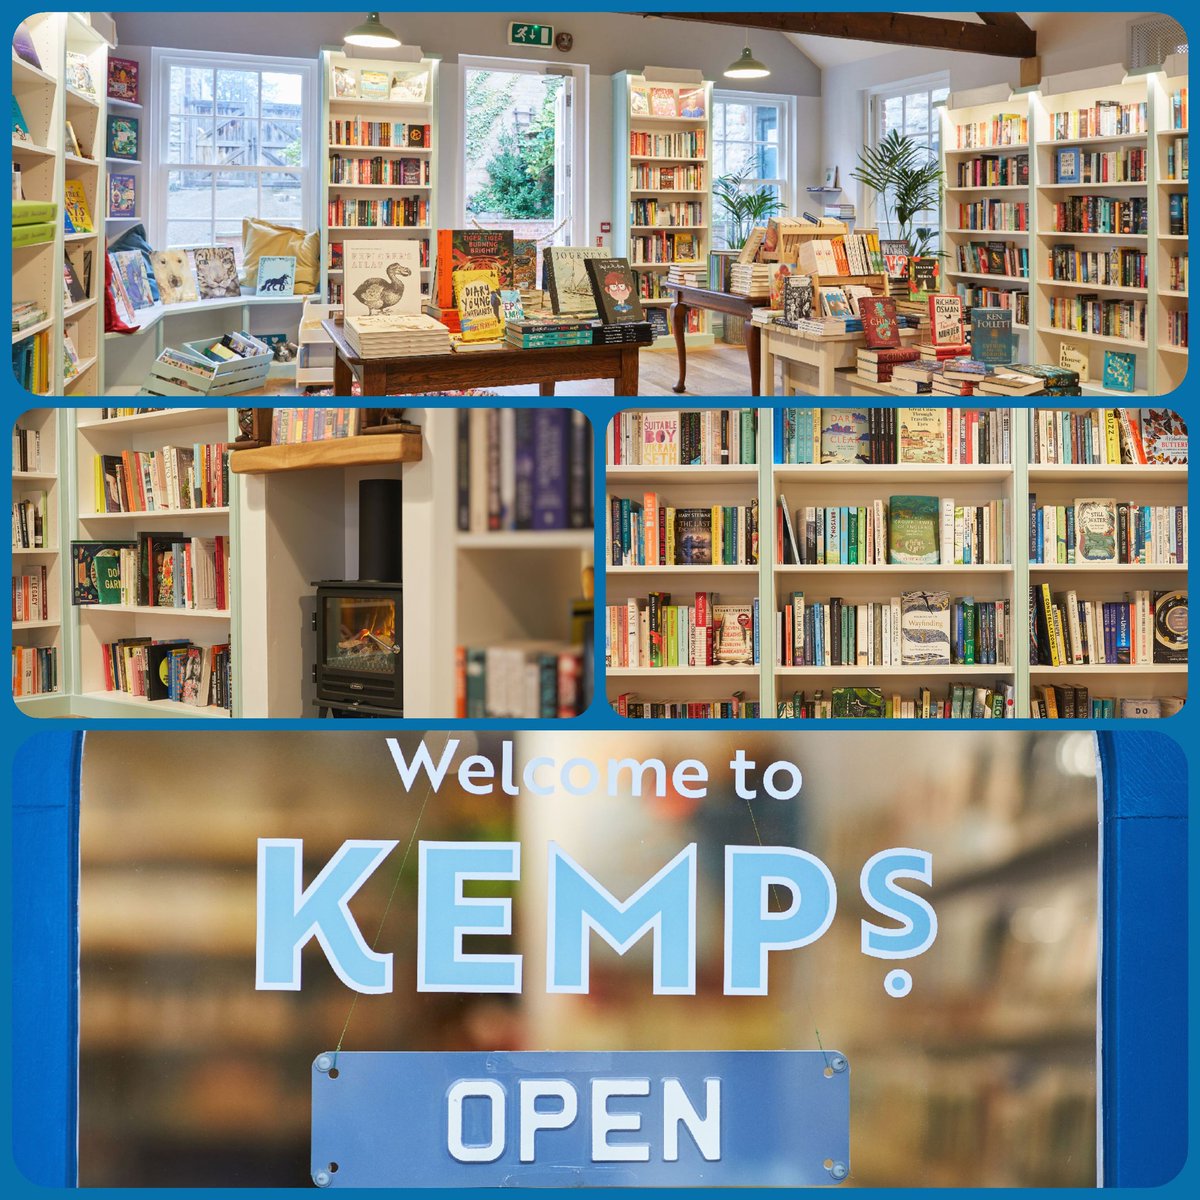 Open Sunday AND Bank Holiday Monday 11 to 3 - so if you are stuck for somewhere to go and something to do, why not pop in for an hour and have a relaxed, safe, browse of our bookshelves and gifts too?
#joyoftext #localbookshop #sundayshelfie #hereforyou #booksaremybag #booklover